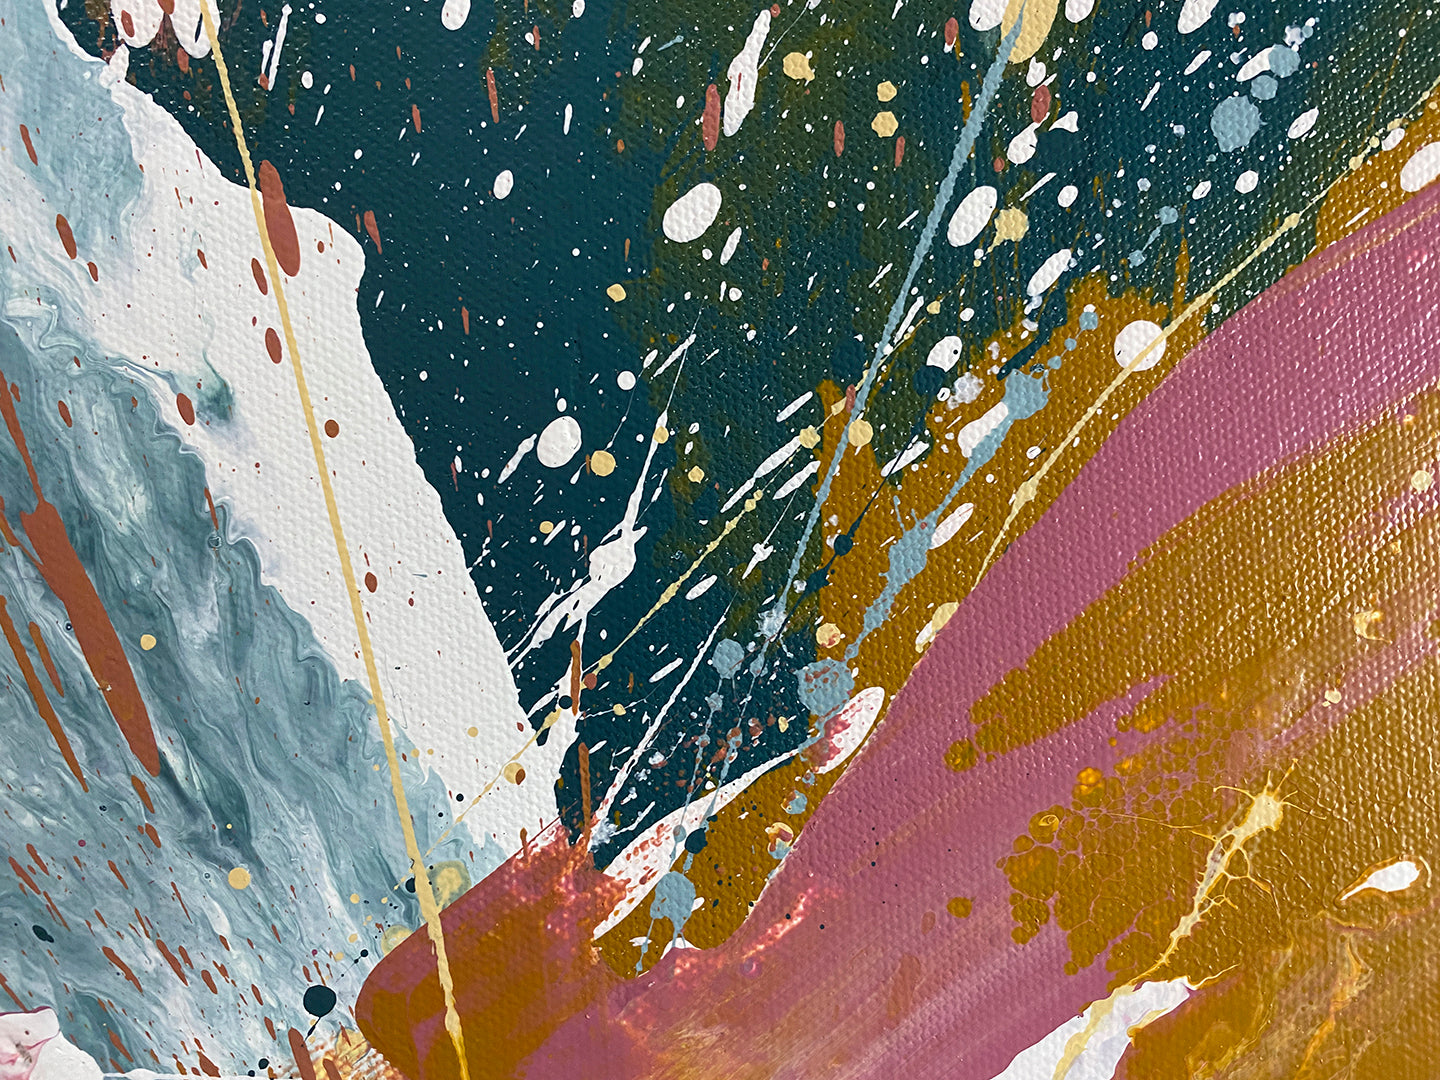 Abstract, expressionism, acrylic painting close-up 3. Splashes and layers of dusty rose, muted teal, dark teal, creamy yellow and white 